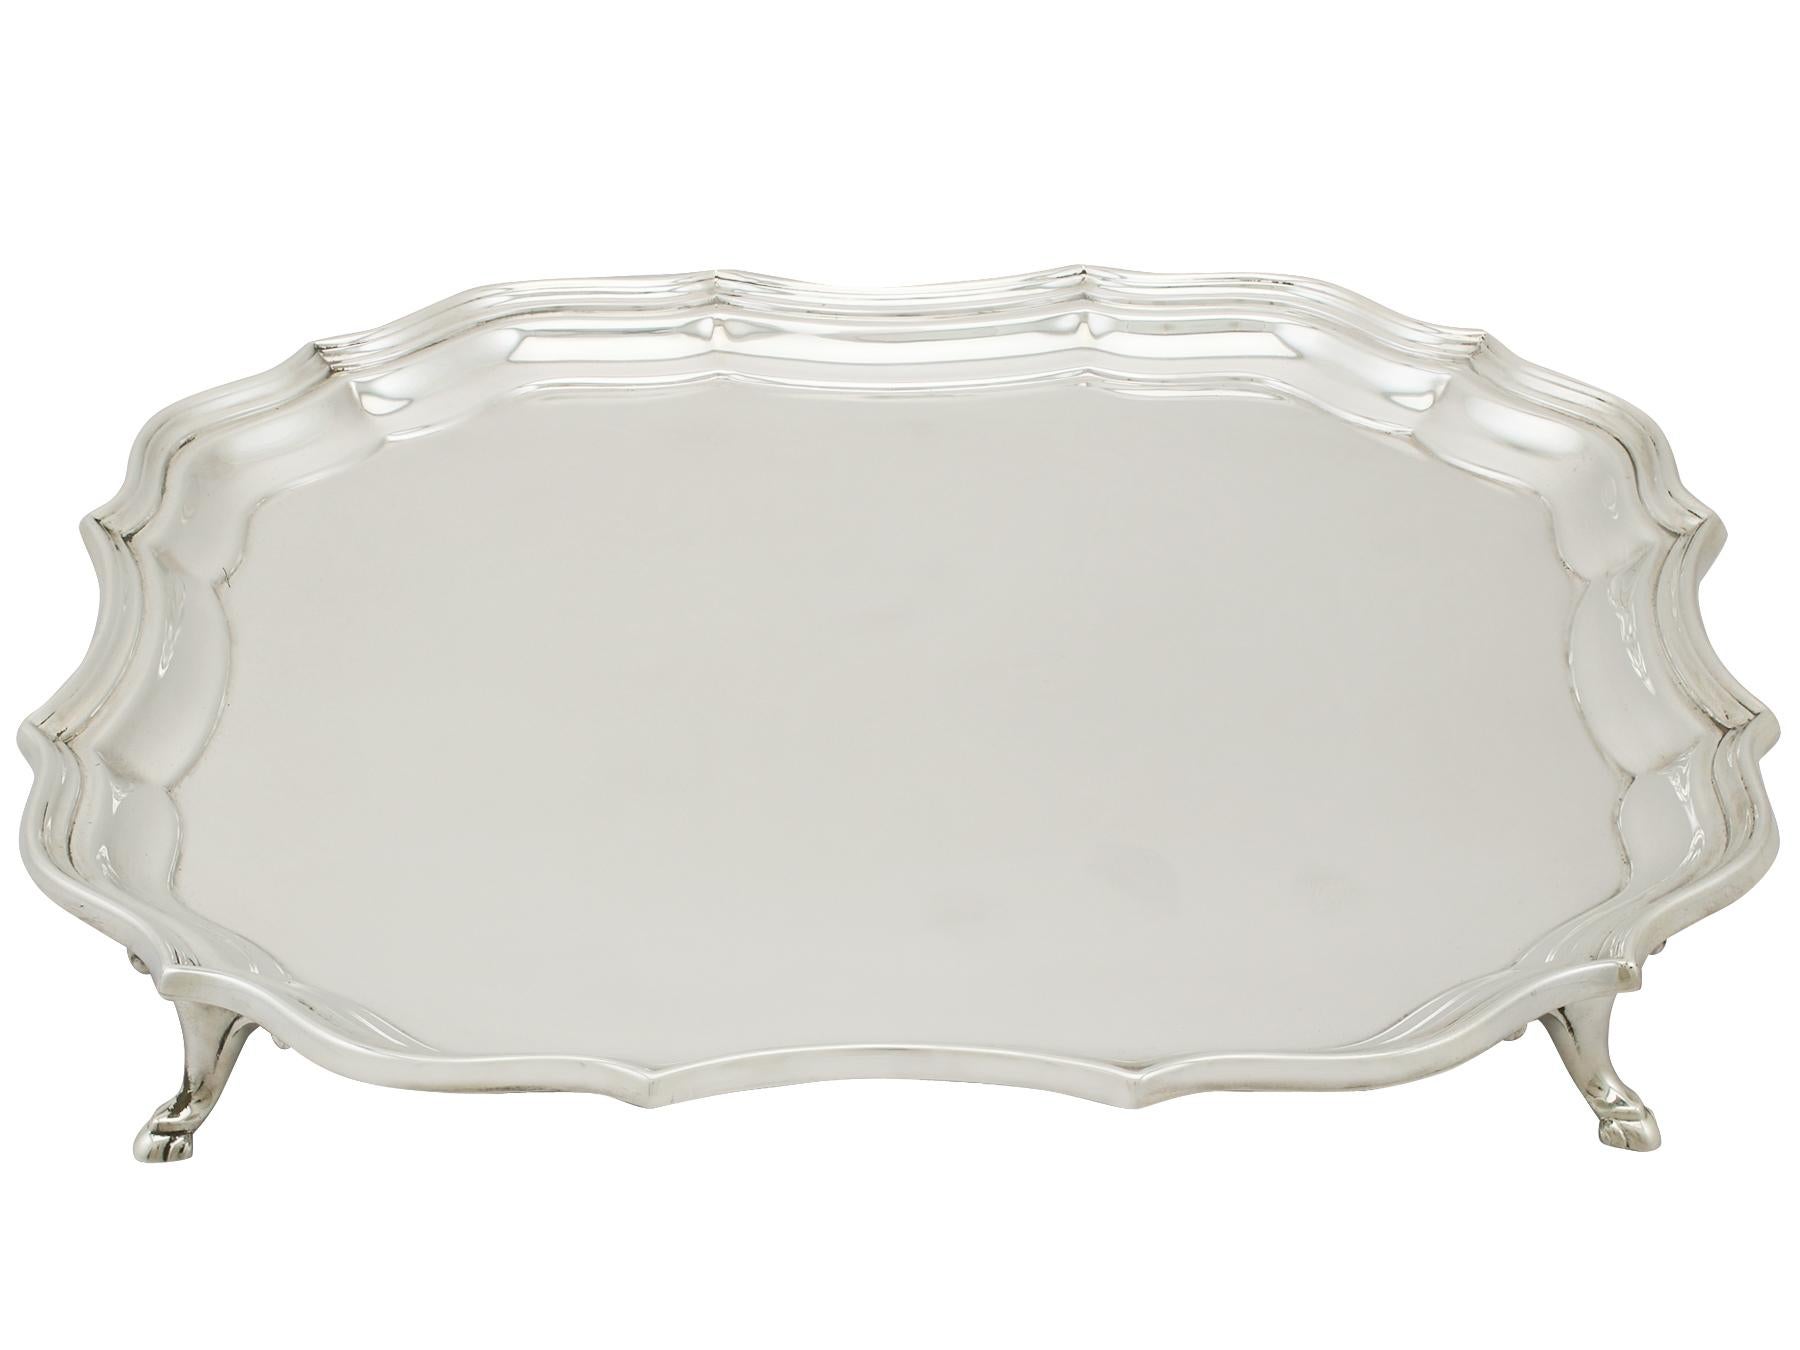 A fine and impressive vintage Elizabeth II English sterling silver salver; an addition to our silver dining collection.

This fine vintage Elizabeth II English sterling silver salver has a square shaped form onto four feet.

The surface of this